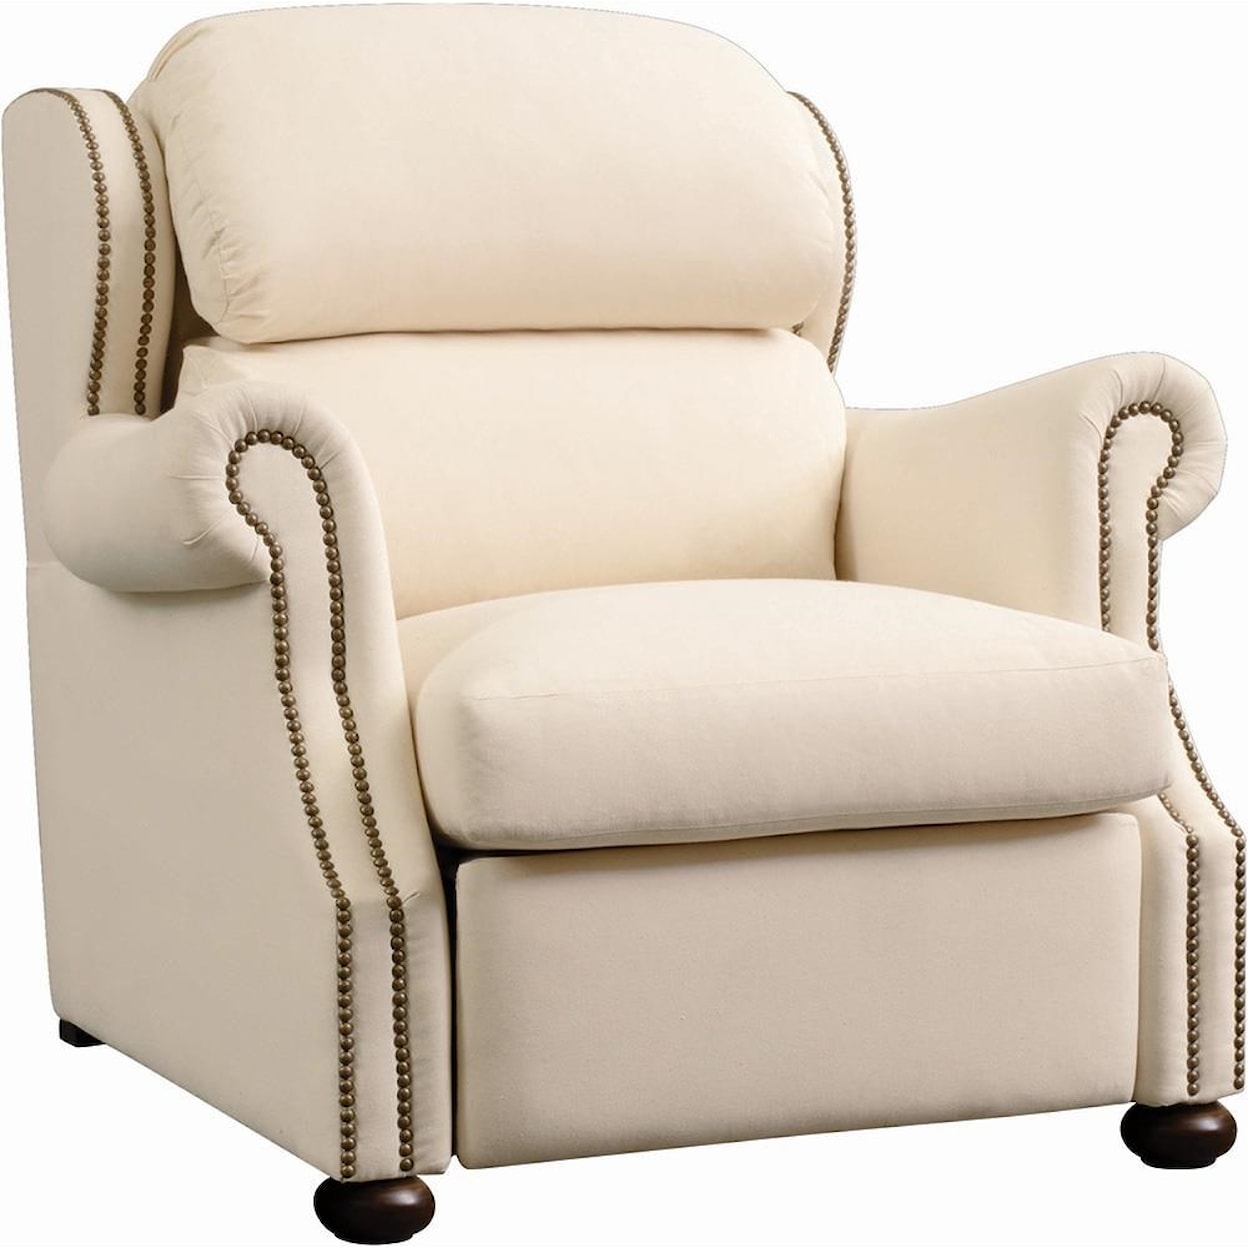 Stickley Stickley Fine Upholstered Chairs Durango Fabric Recliner